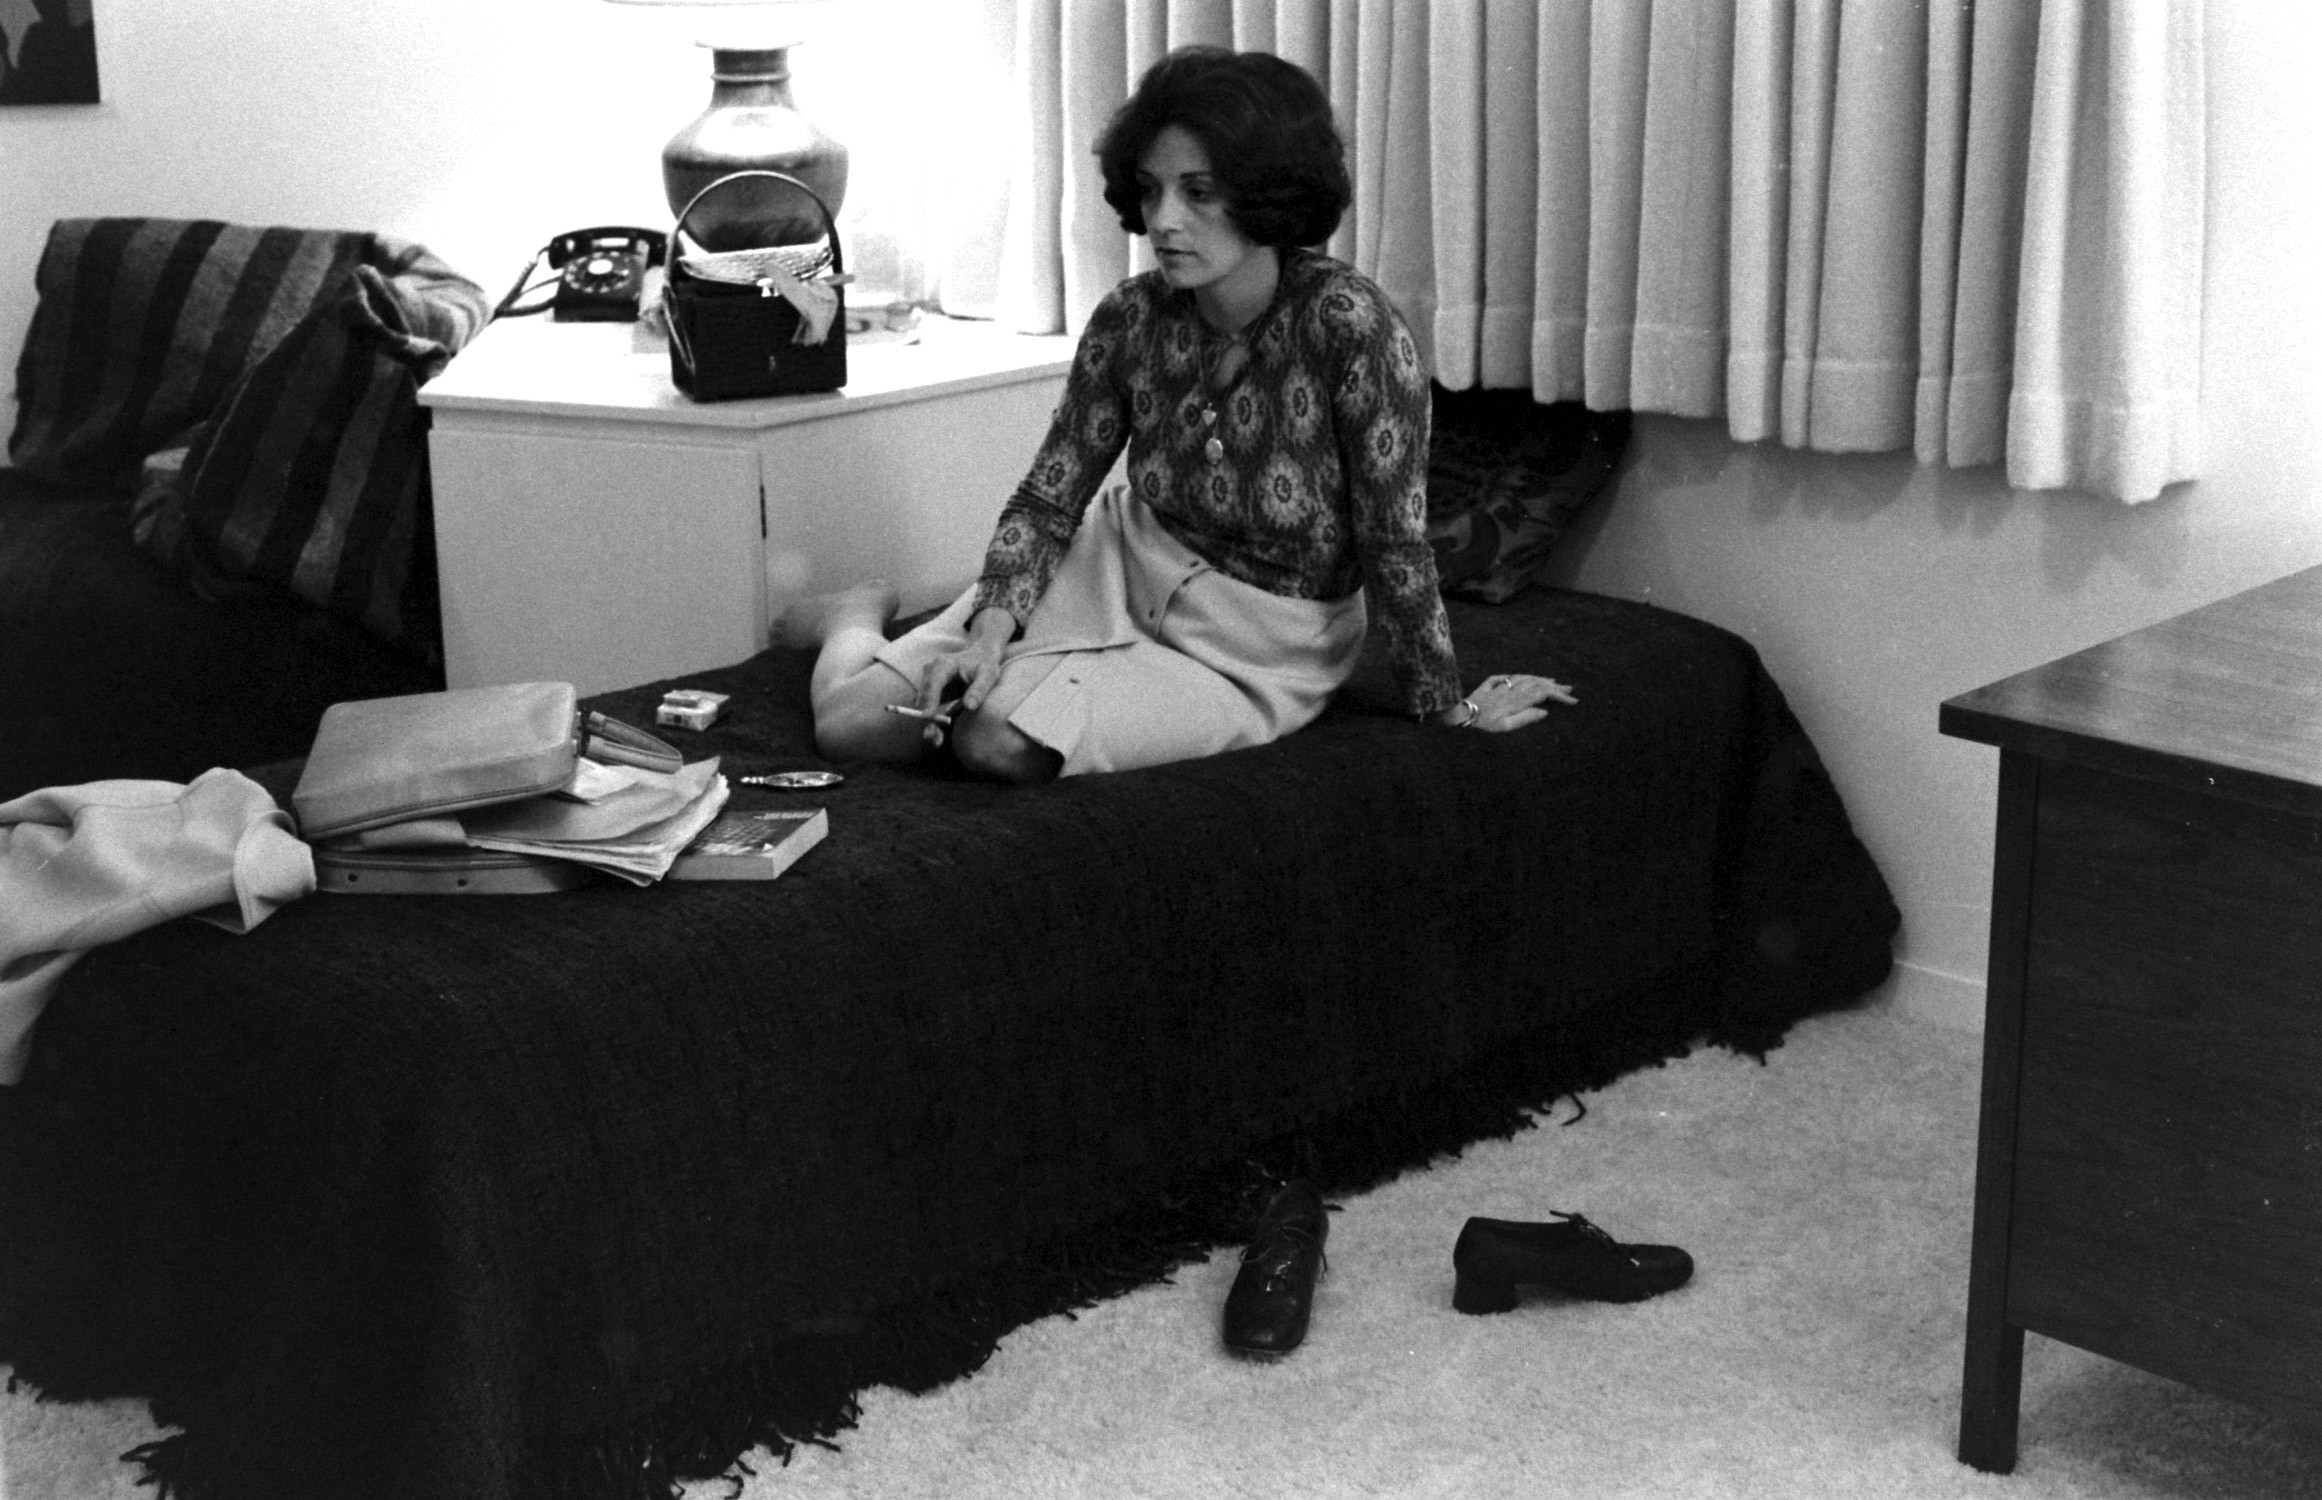 POW wife Valerie Kushner from a LIFE photo essay by Leonard McCombe in 1972.